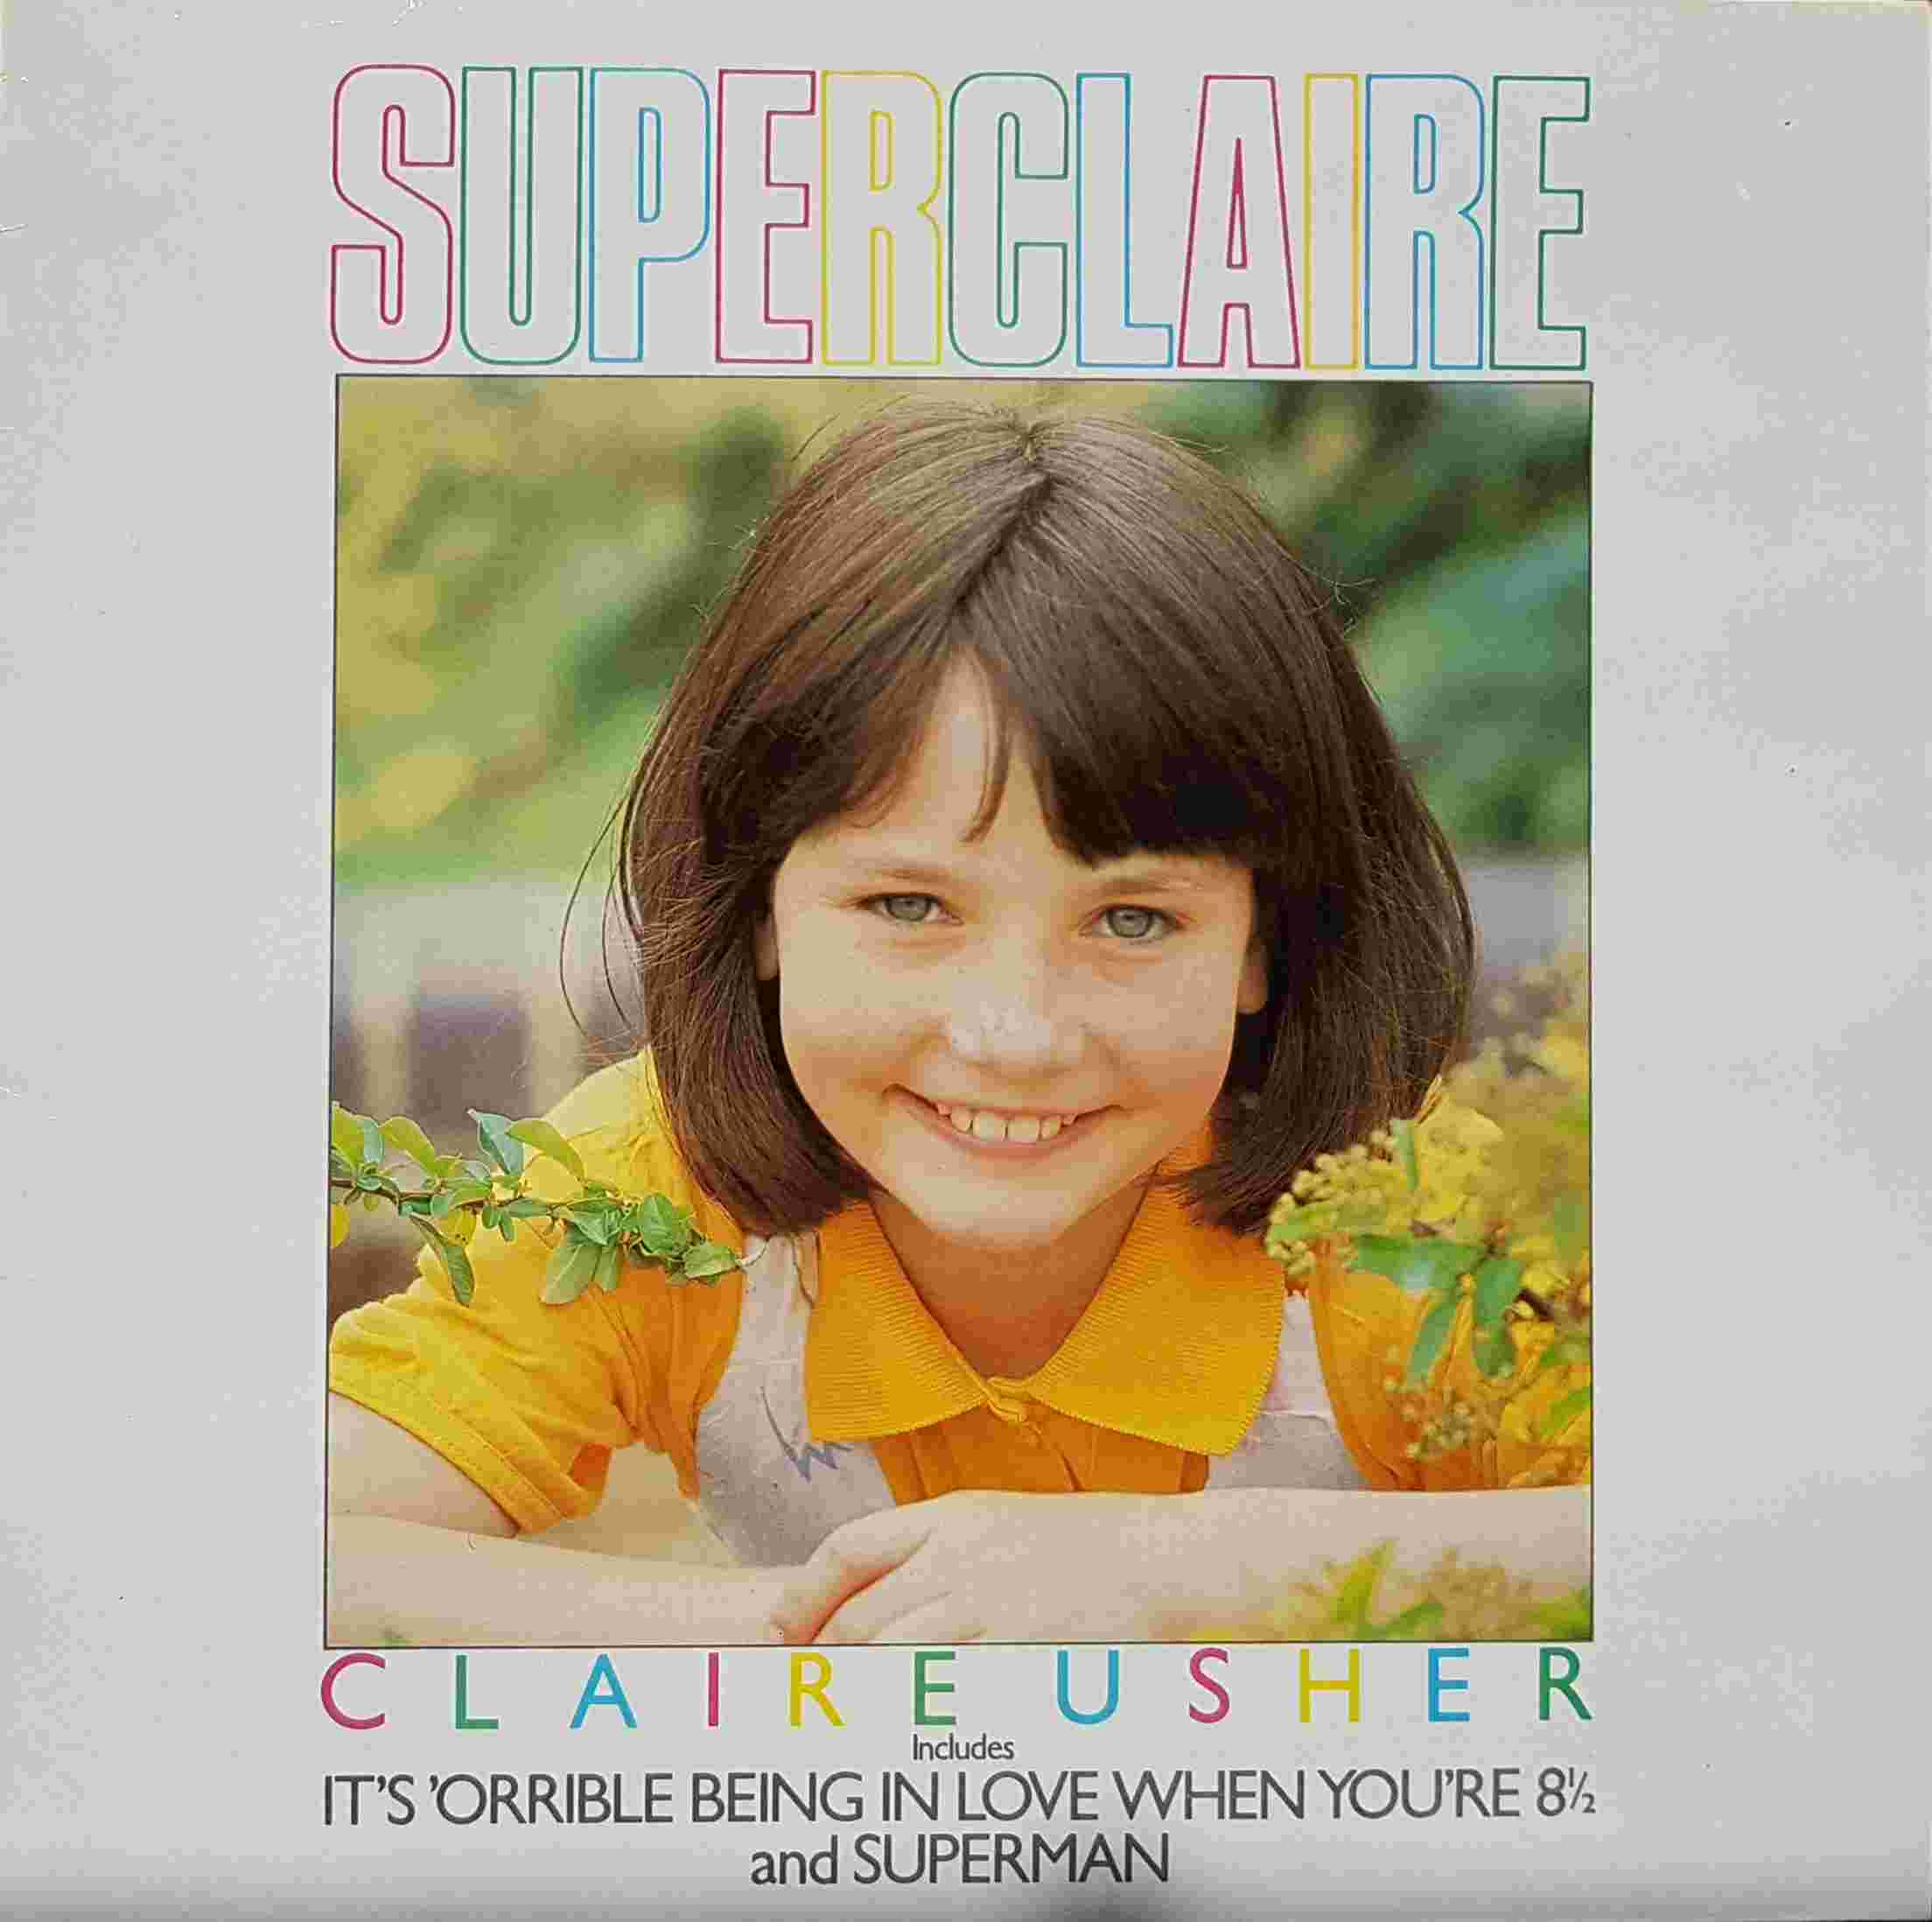 Picture of REB 606 Super Claire by artist Claire Usher from the BBC albums - Records and Tapes library